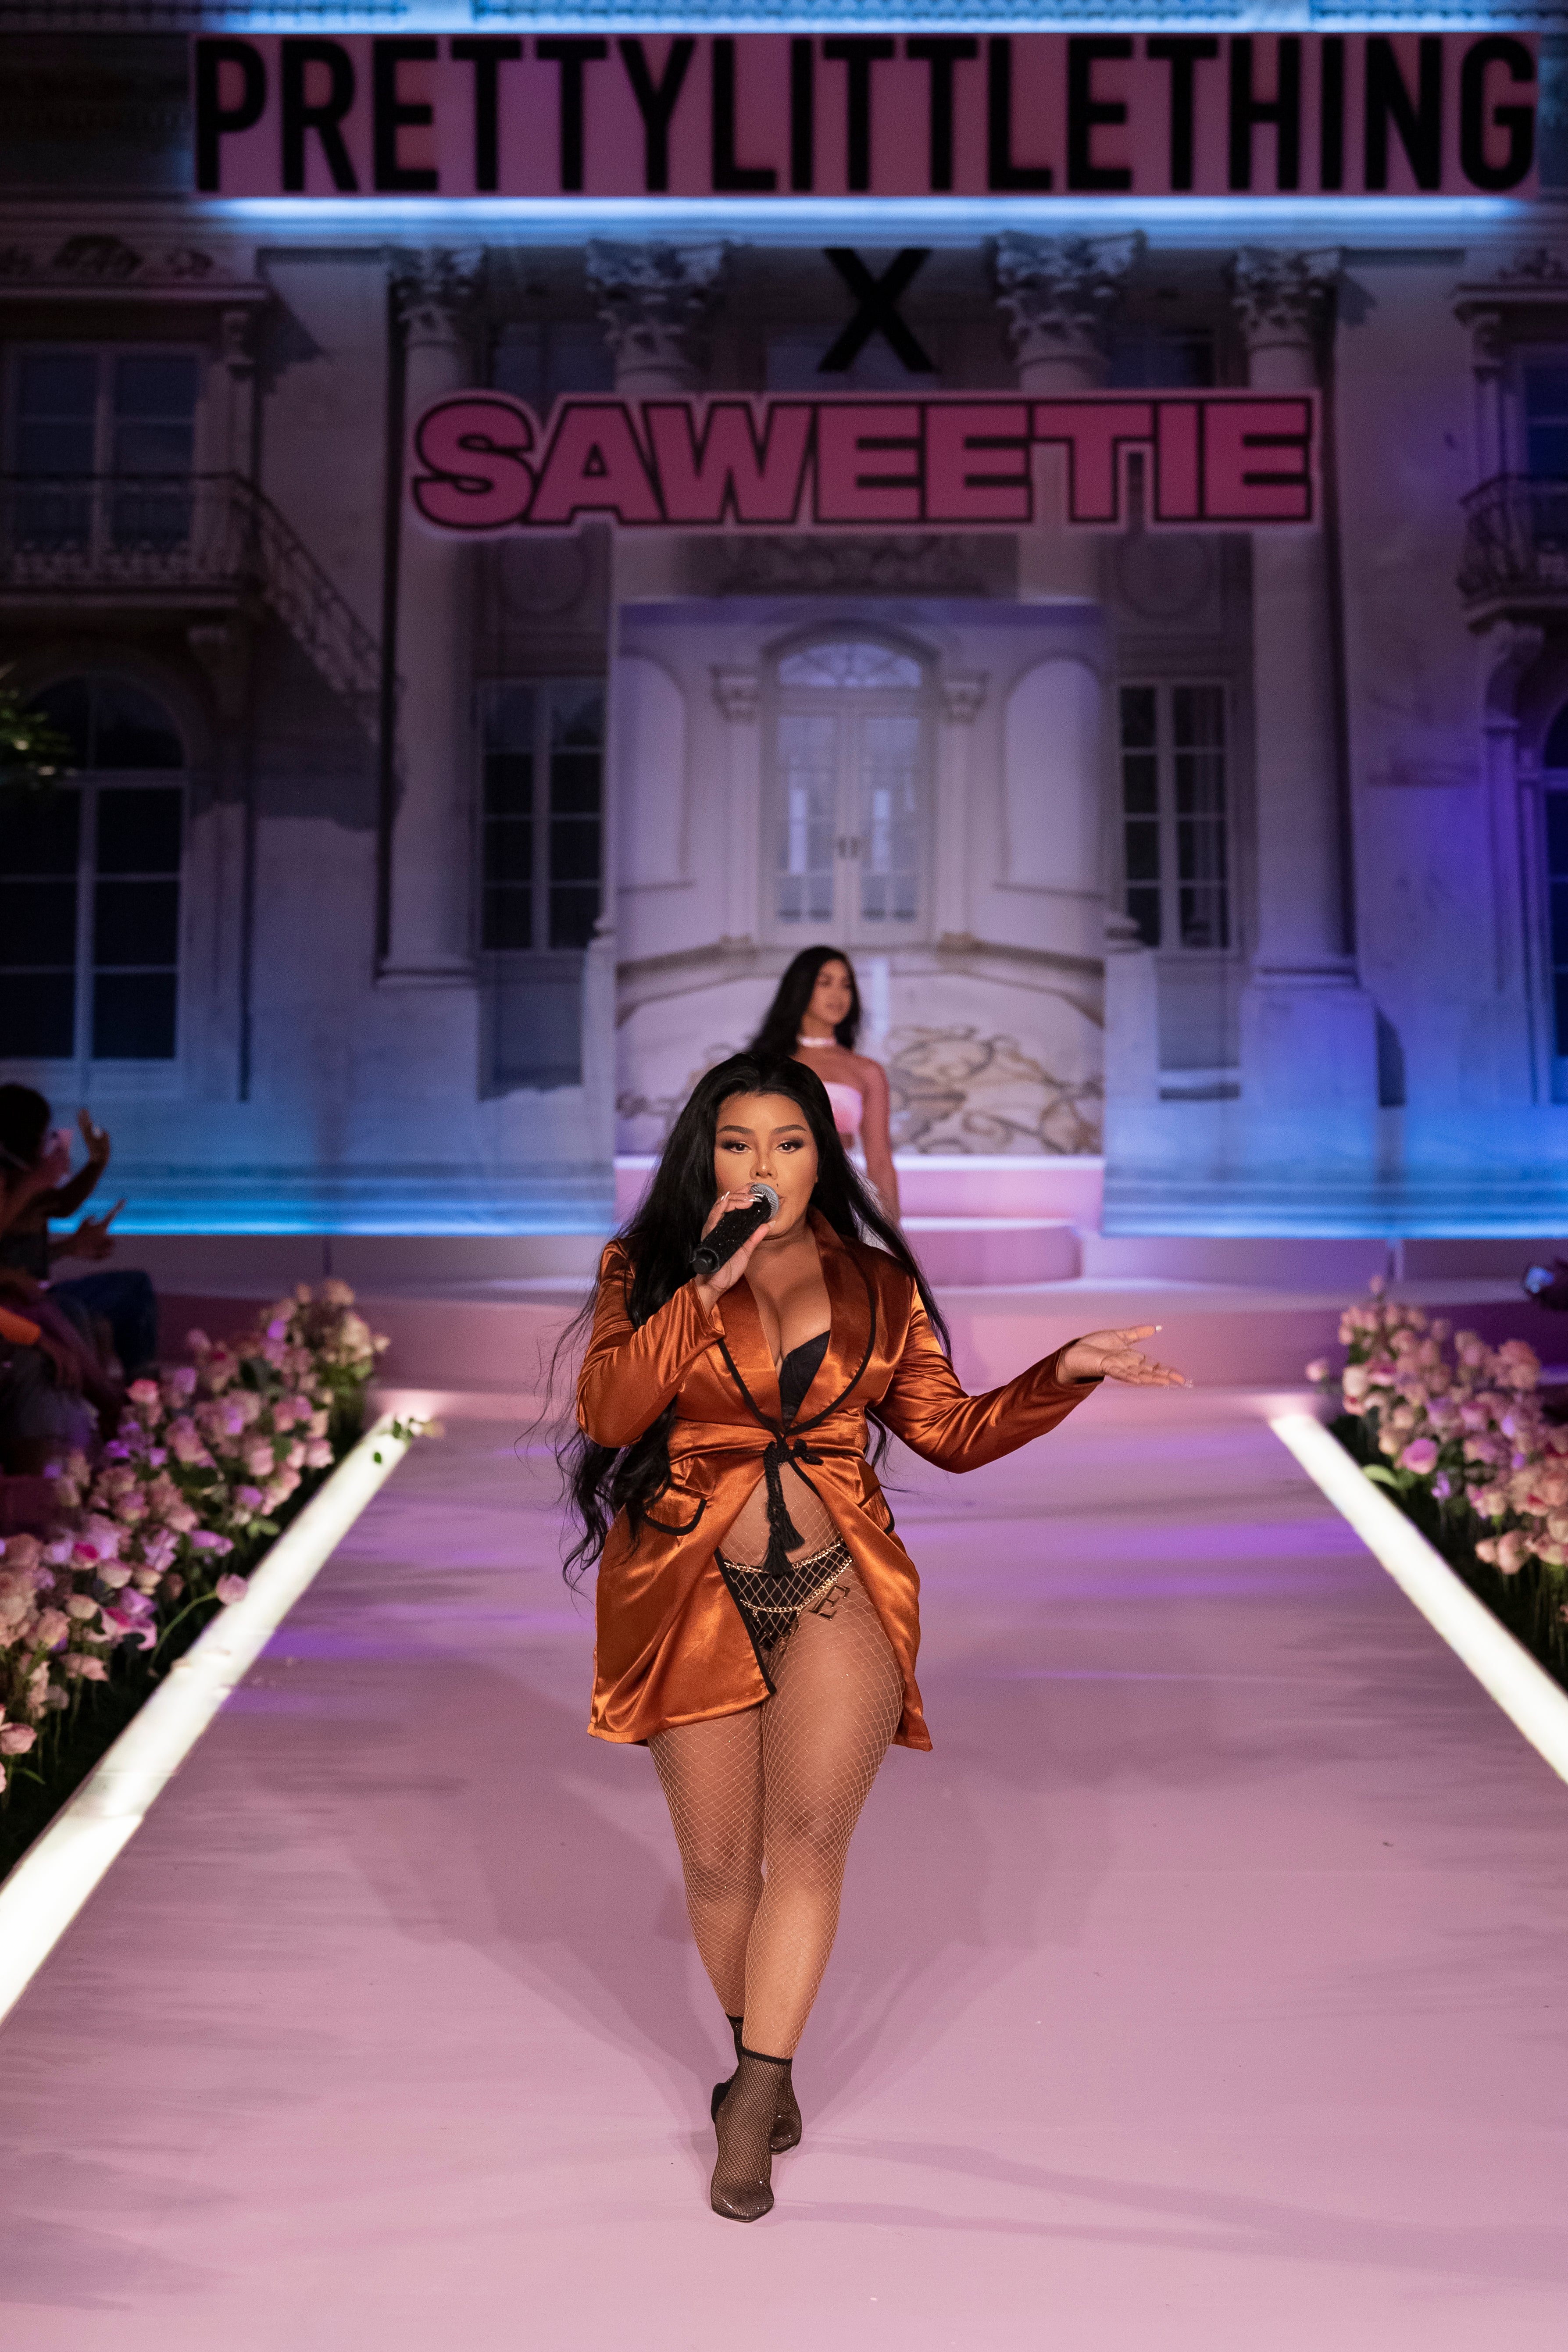 NYFW: Saweetie Hosts Celeb-Filled Fashion Show With PrettyLittleThing